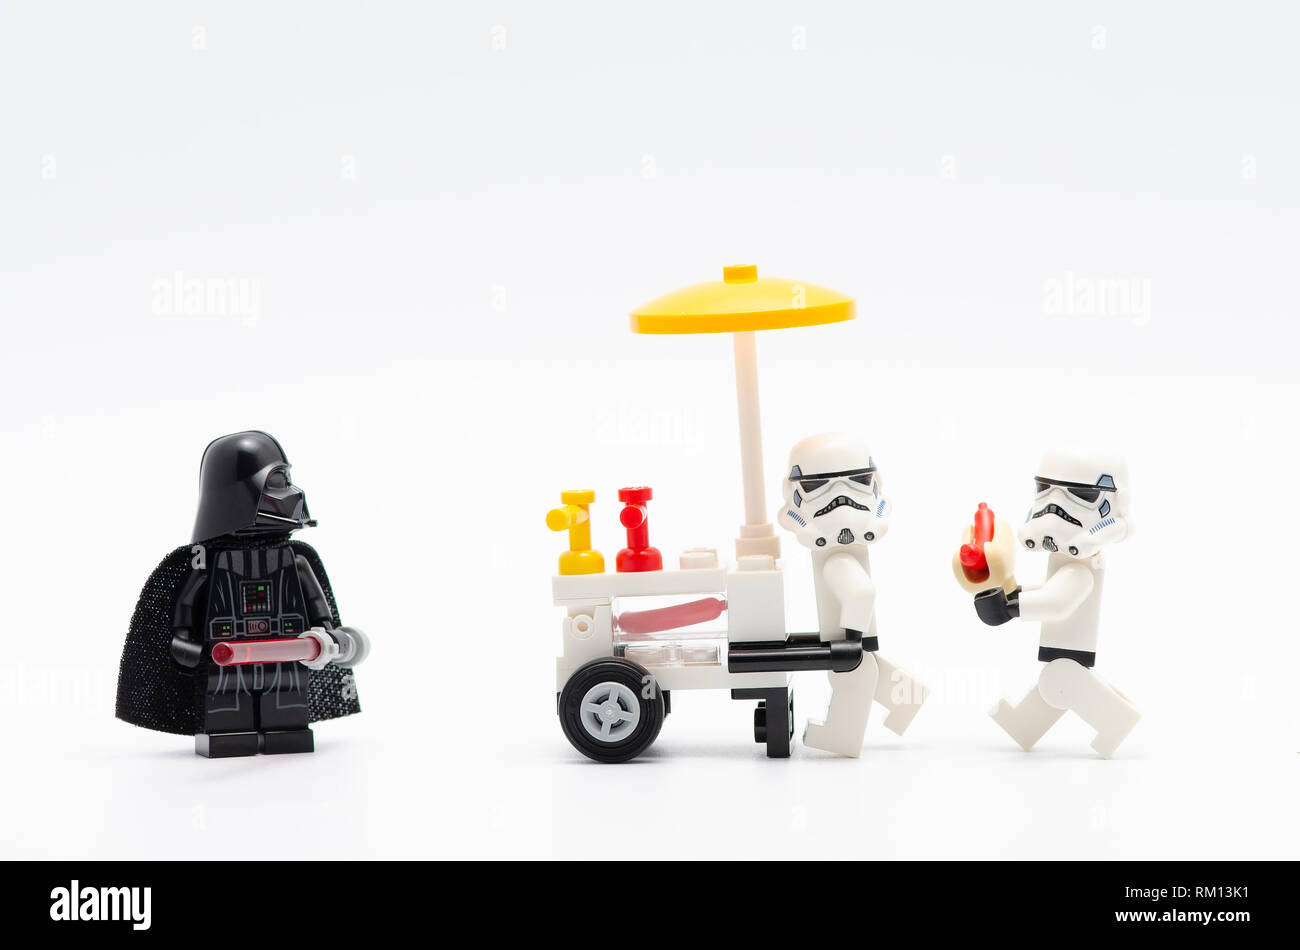 darth vader and storm troopers with food stall . Lego minifigures are  manufactured by The Lego Stock Photo - Alamy